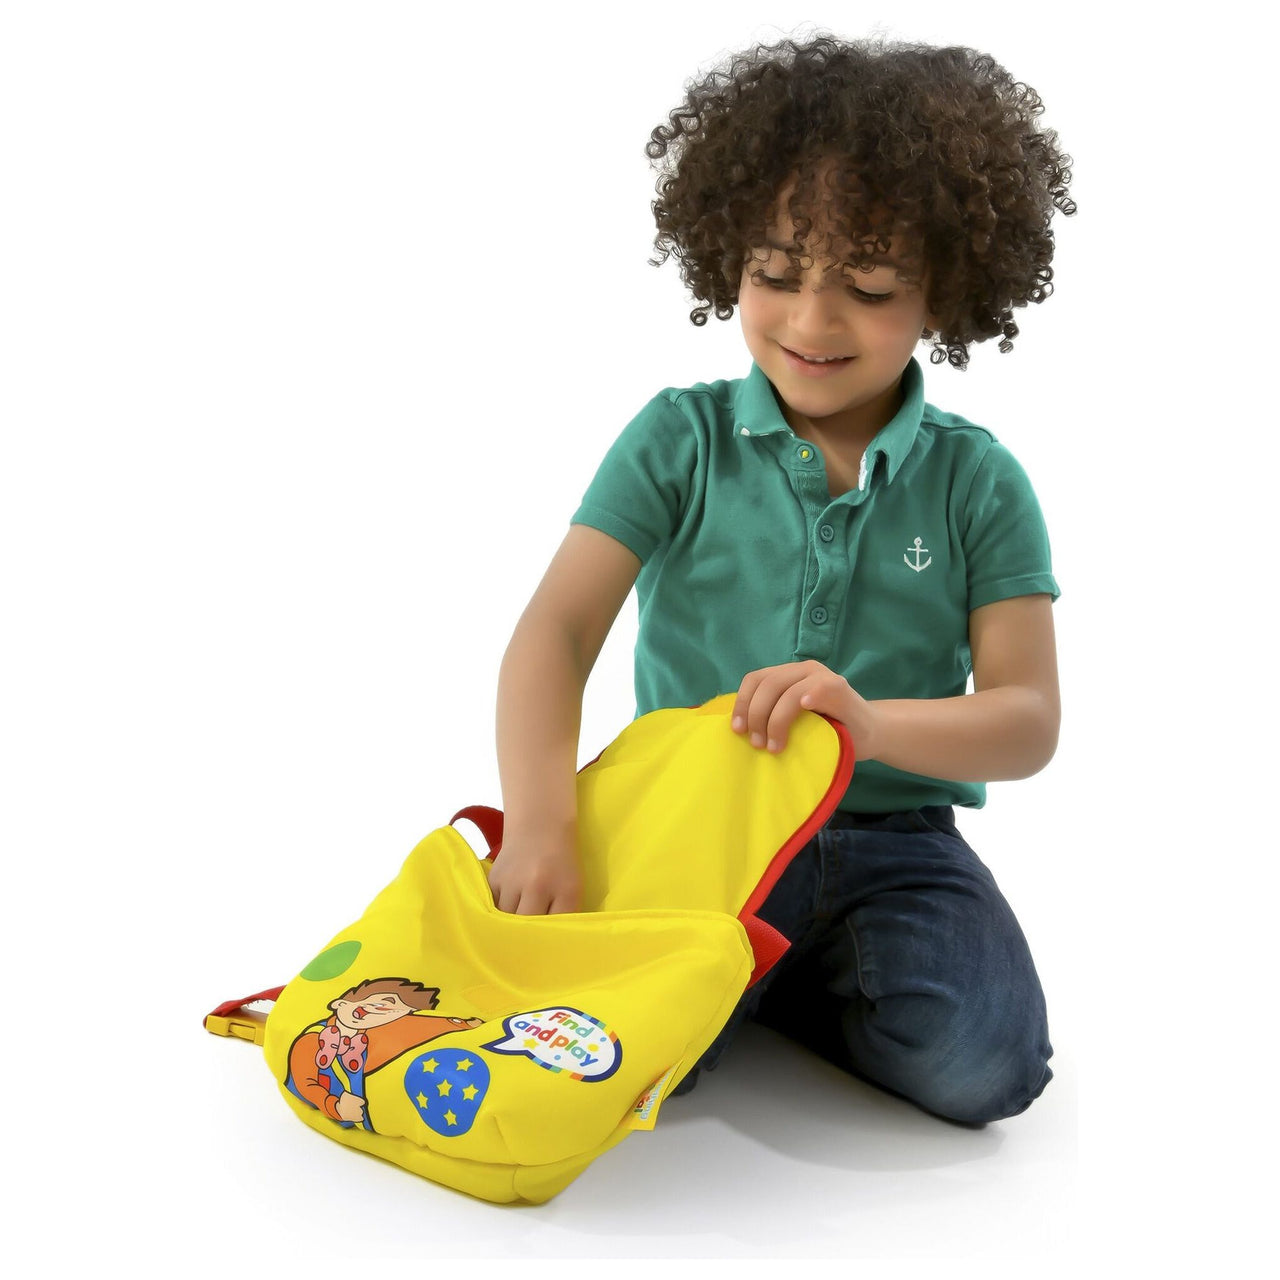 Mr Tumble's Sensory Seek And Find Spotty Bag With Fun Sounds Mr Tumble